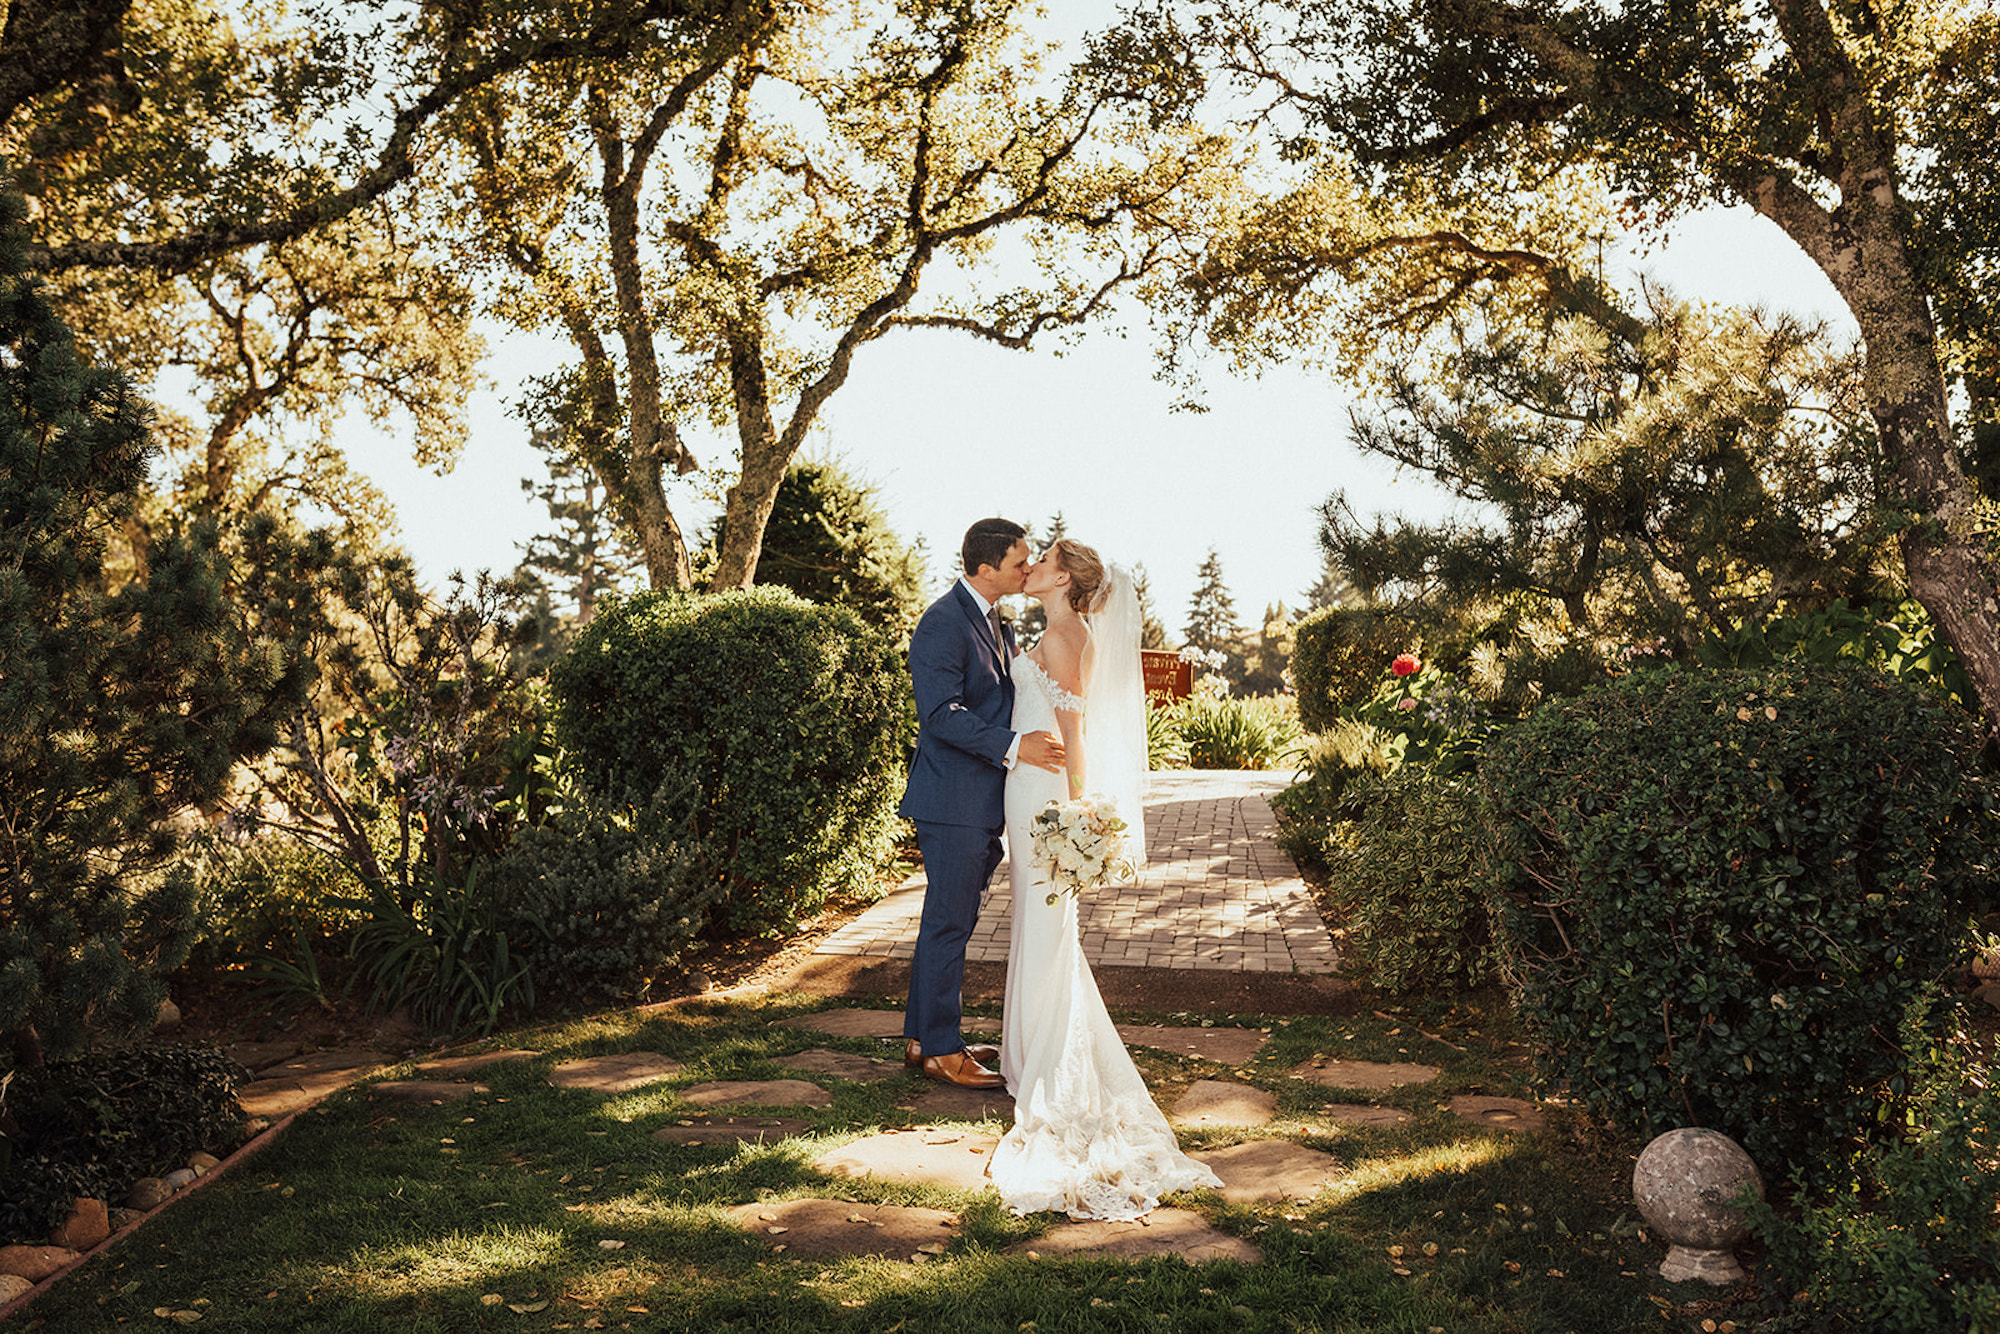 A bride and groom kissing in the garden